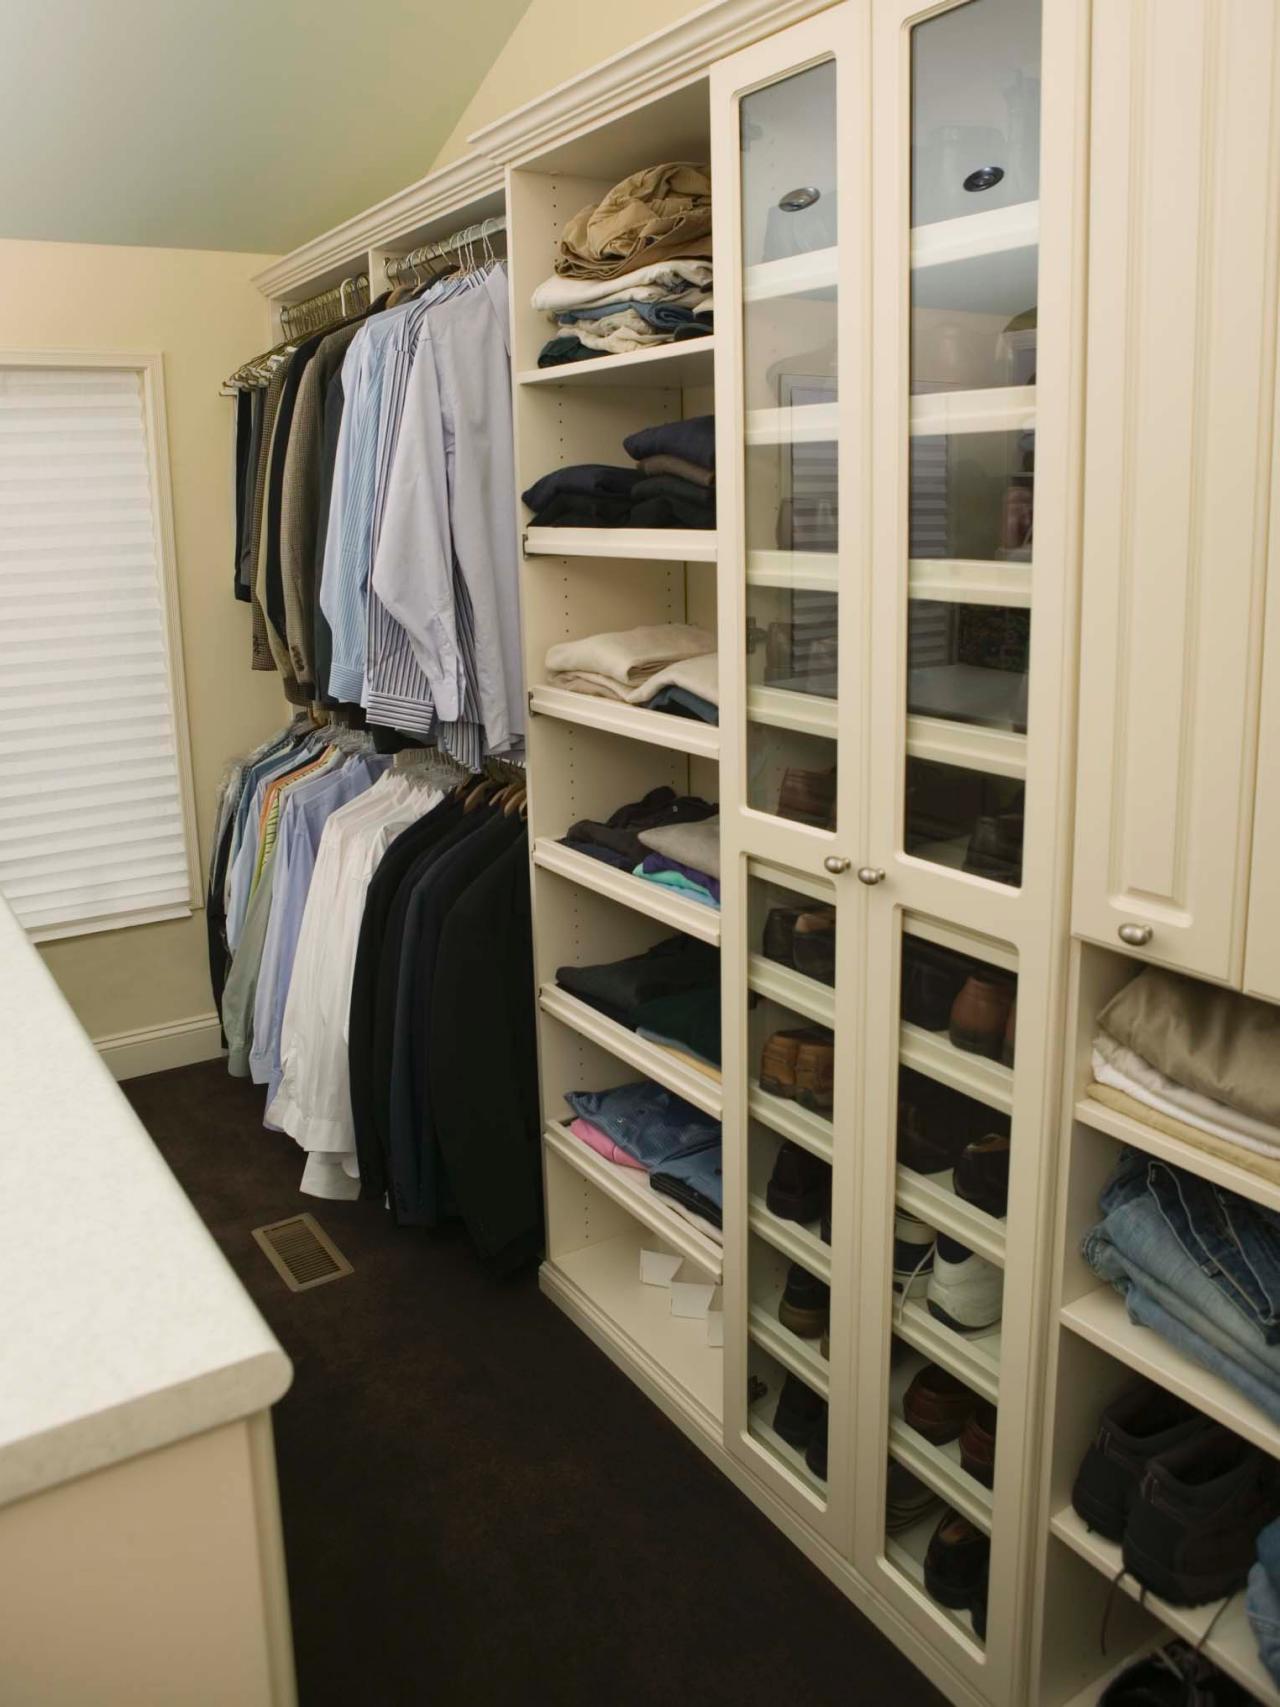 10 Steps To An Organized Closet, How To Organise Clothing Shelves